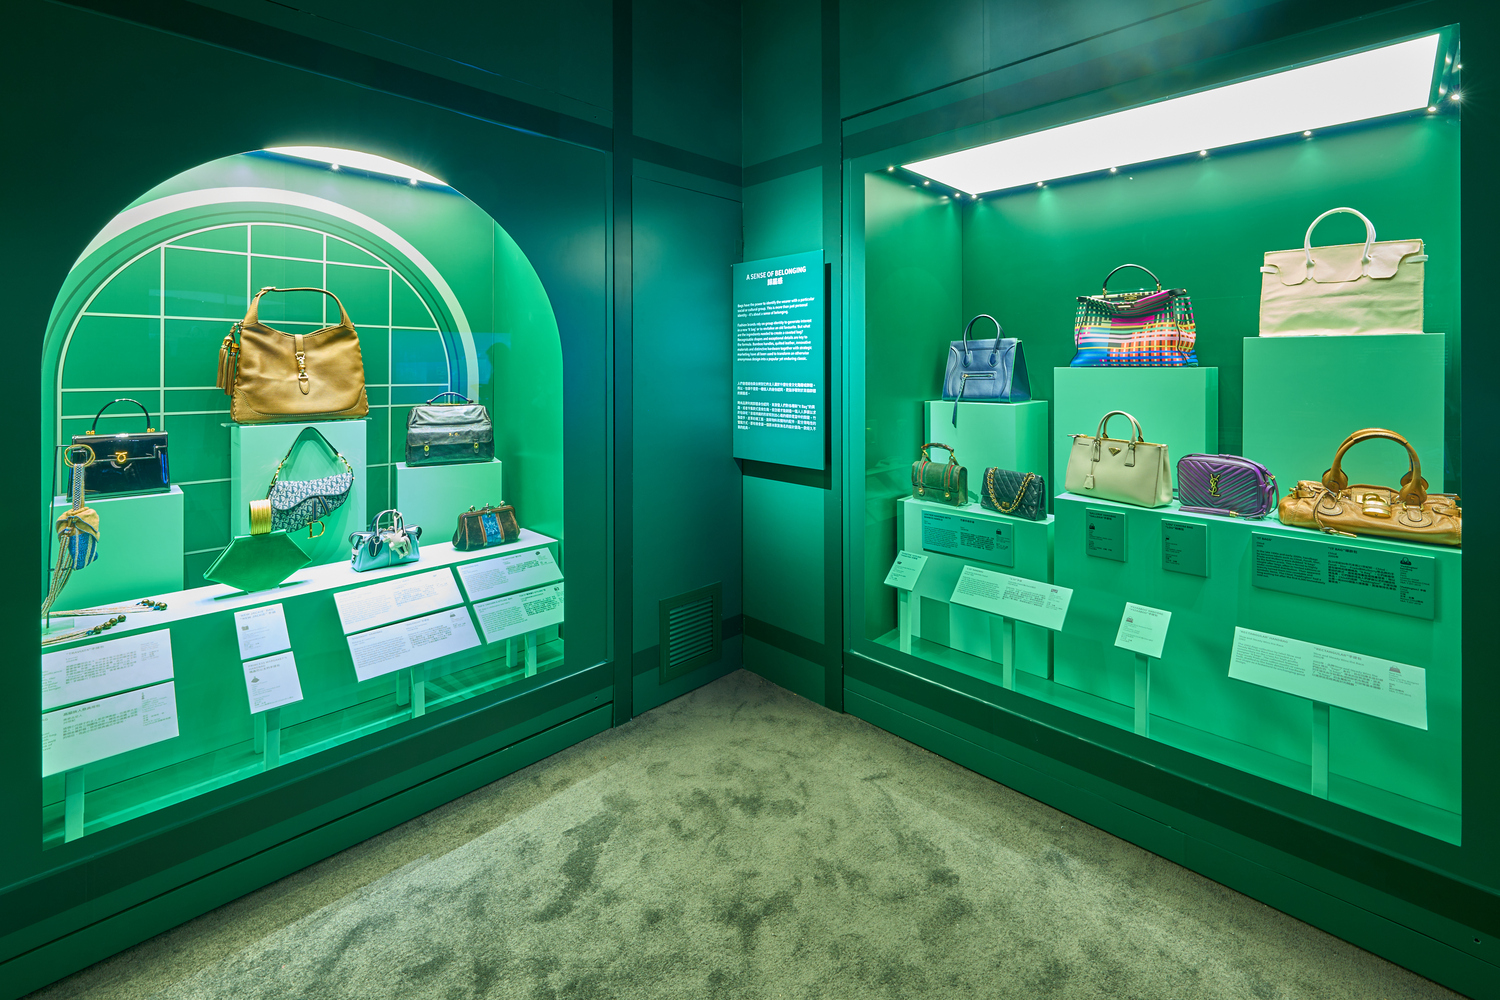 Bags: Inside Out is Curated by Dr Lucia Savi and comprising over 240 objects.